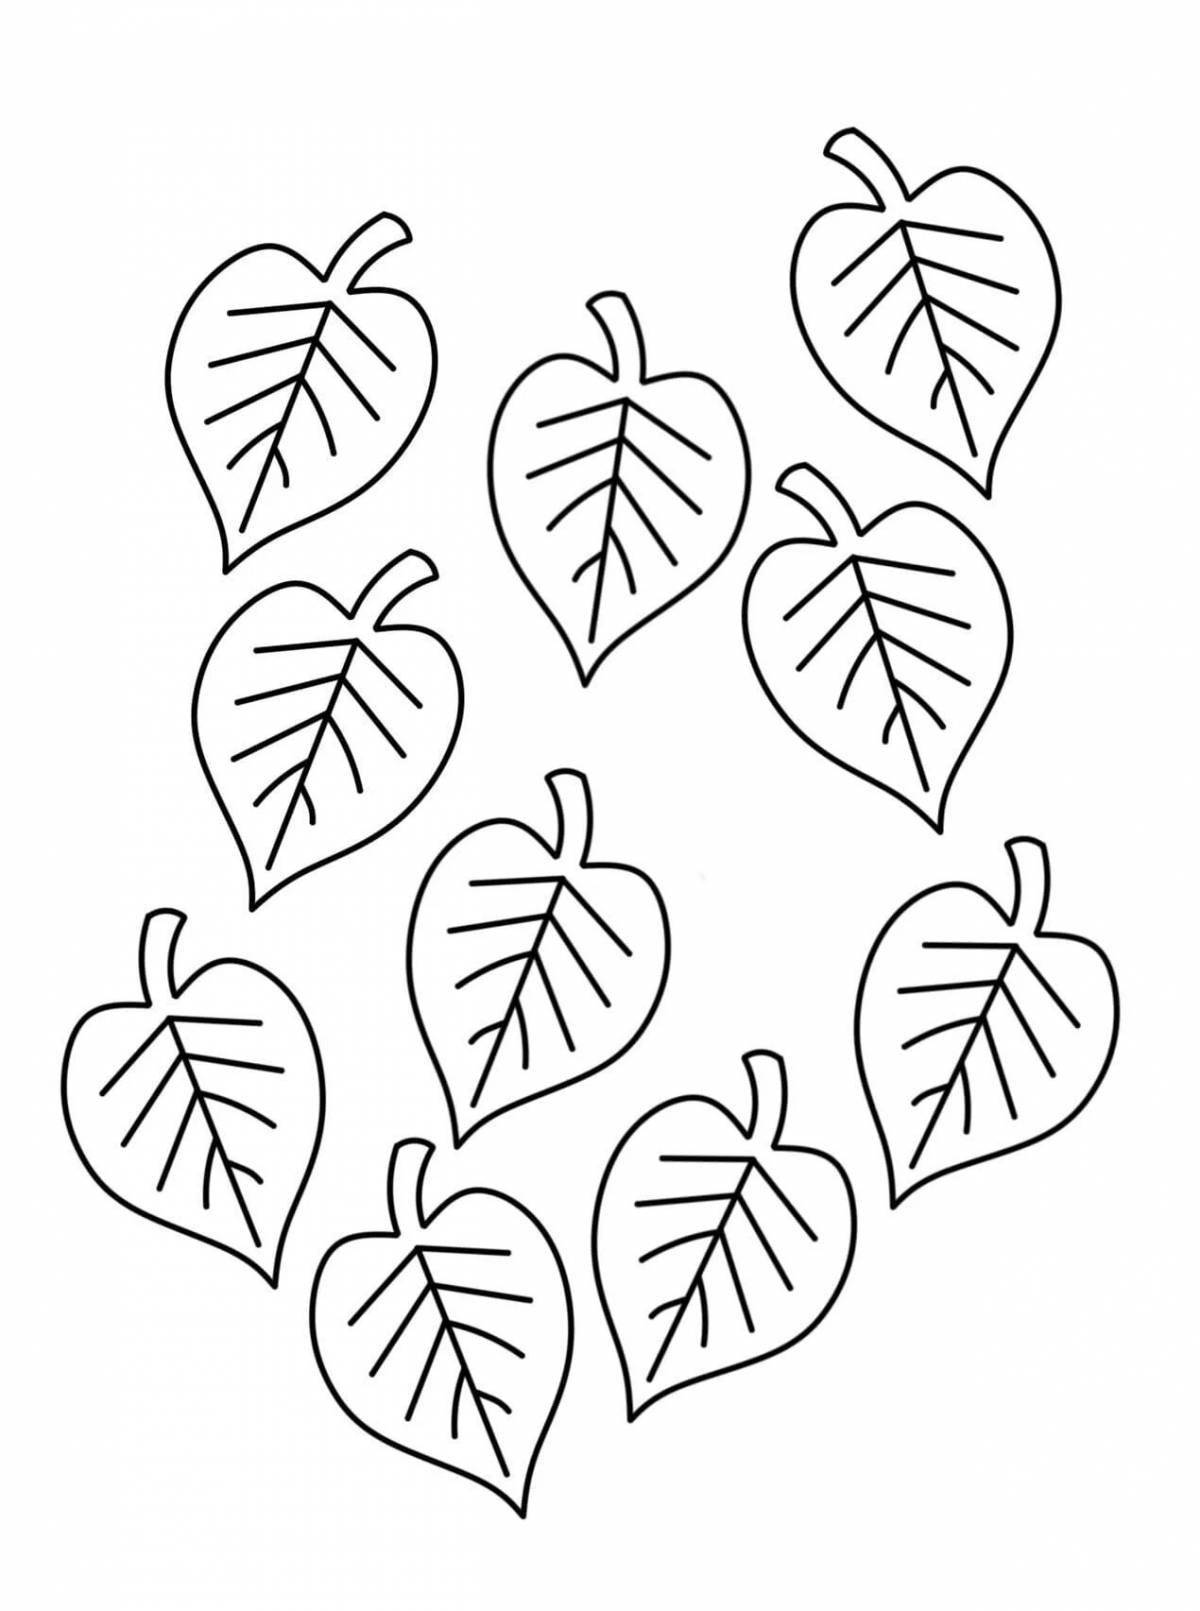 Great coloring book with lots of leaves